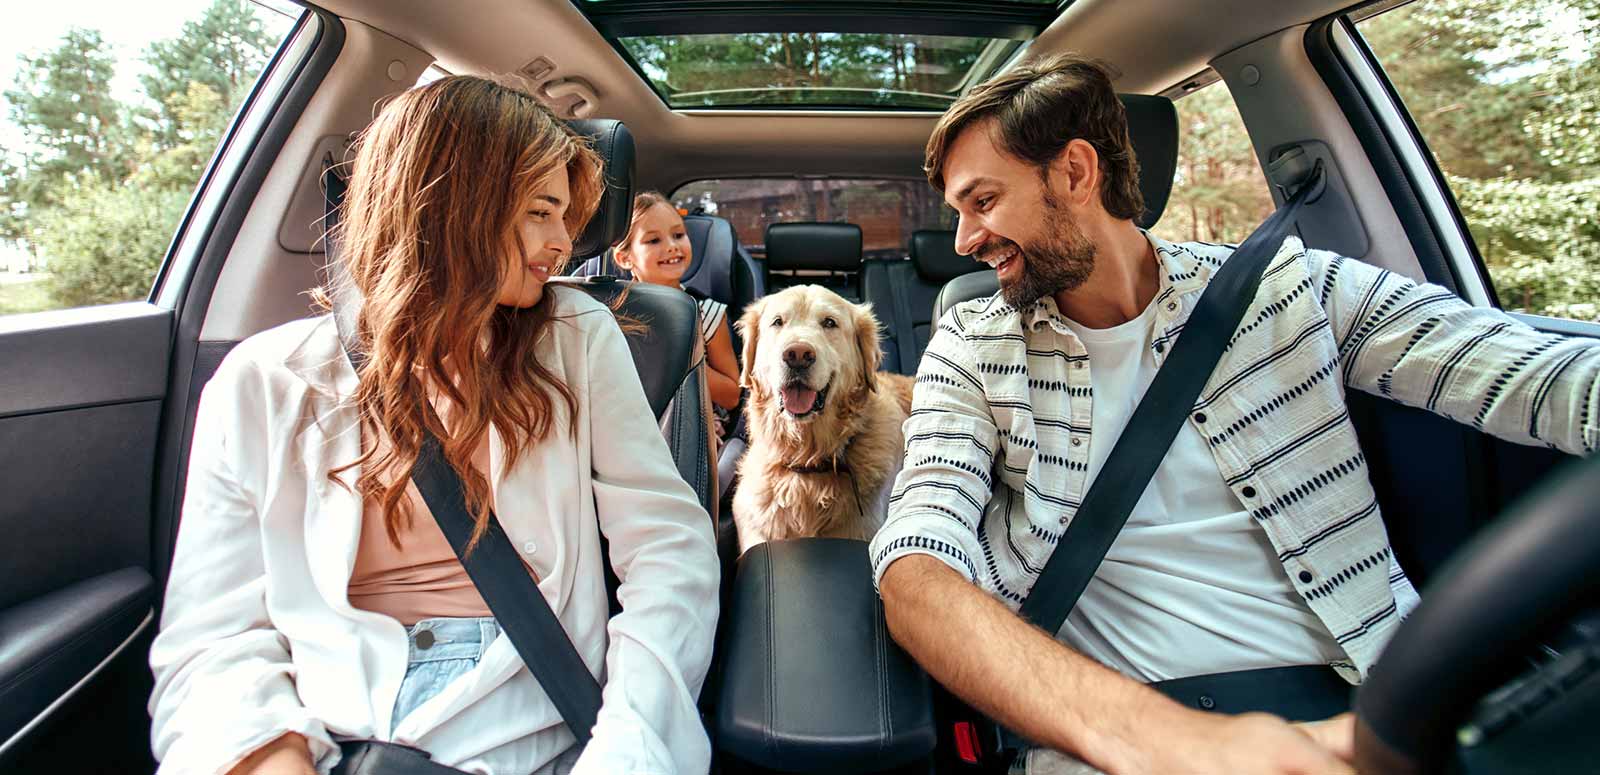 Family and dog in vehicle